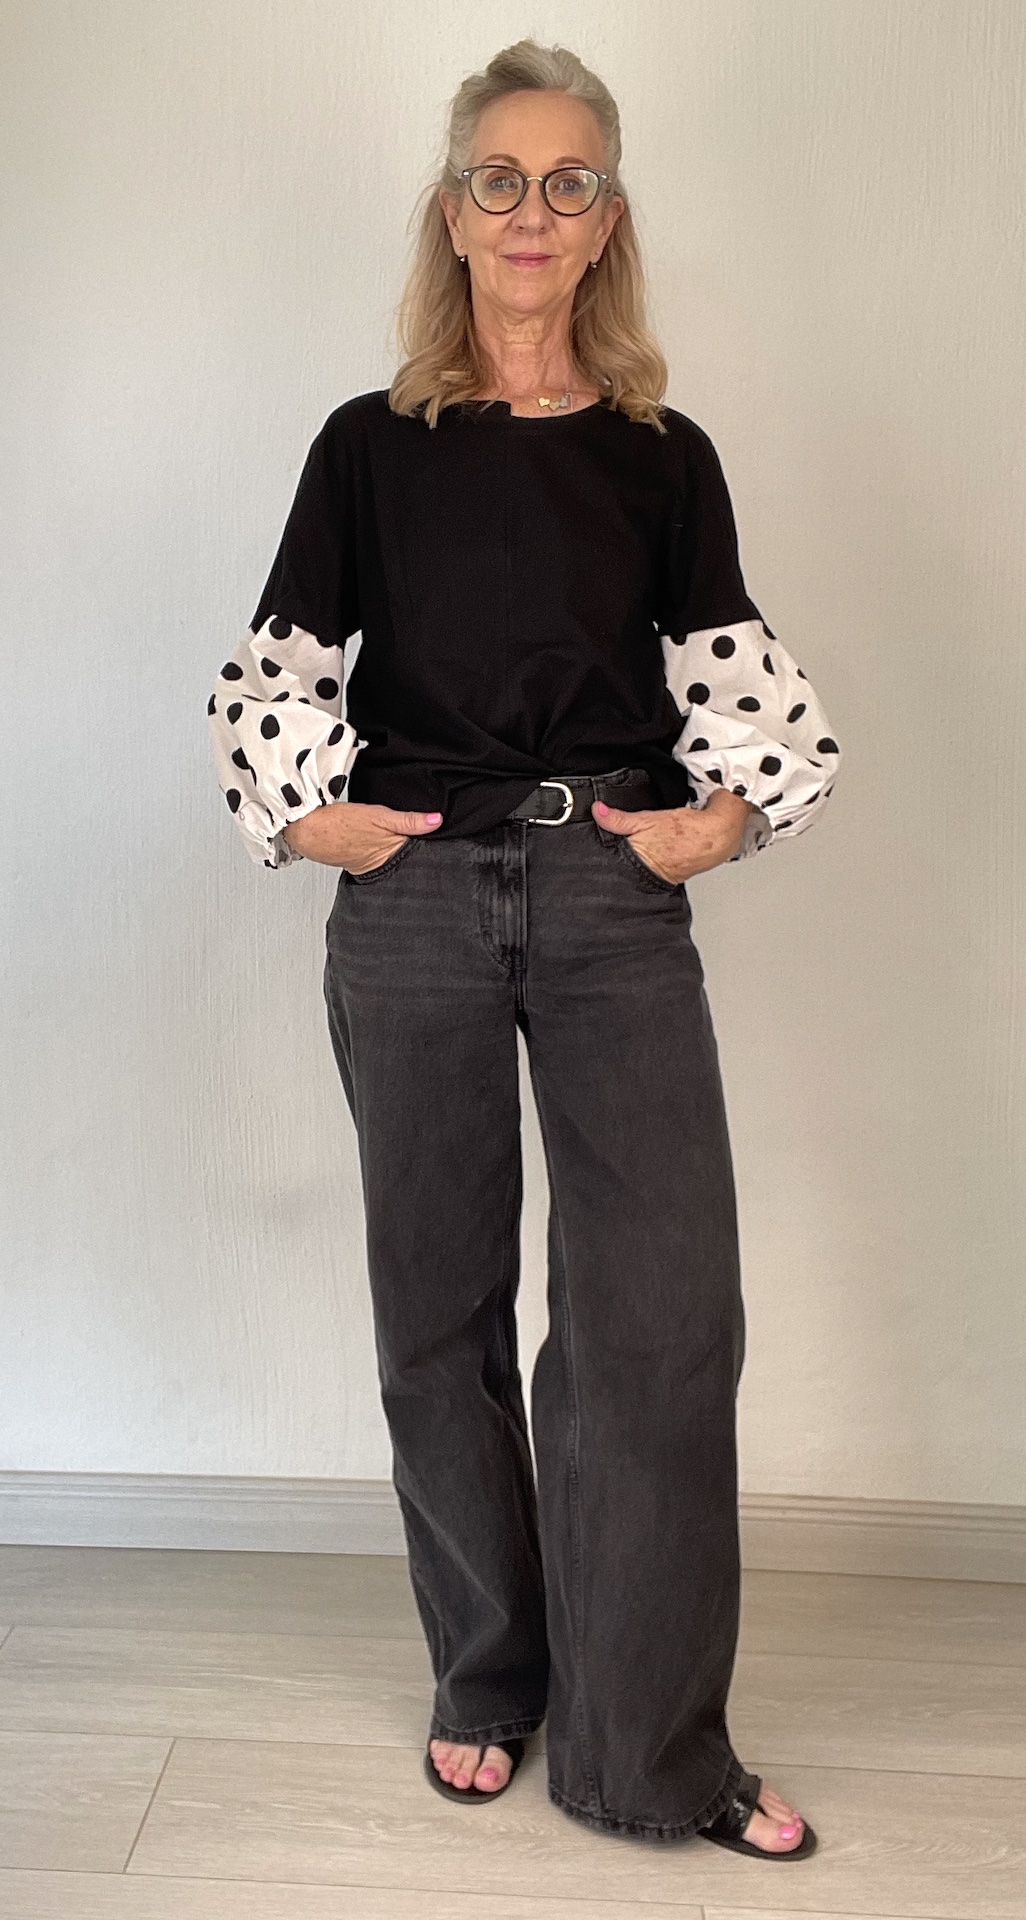 Black T – style 4 with white and black polka dots